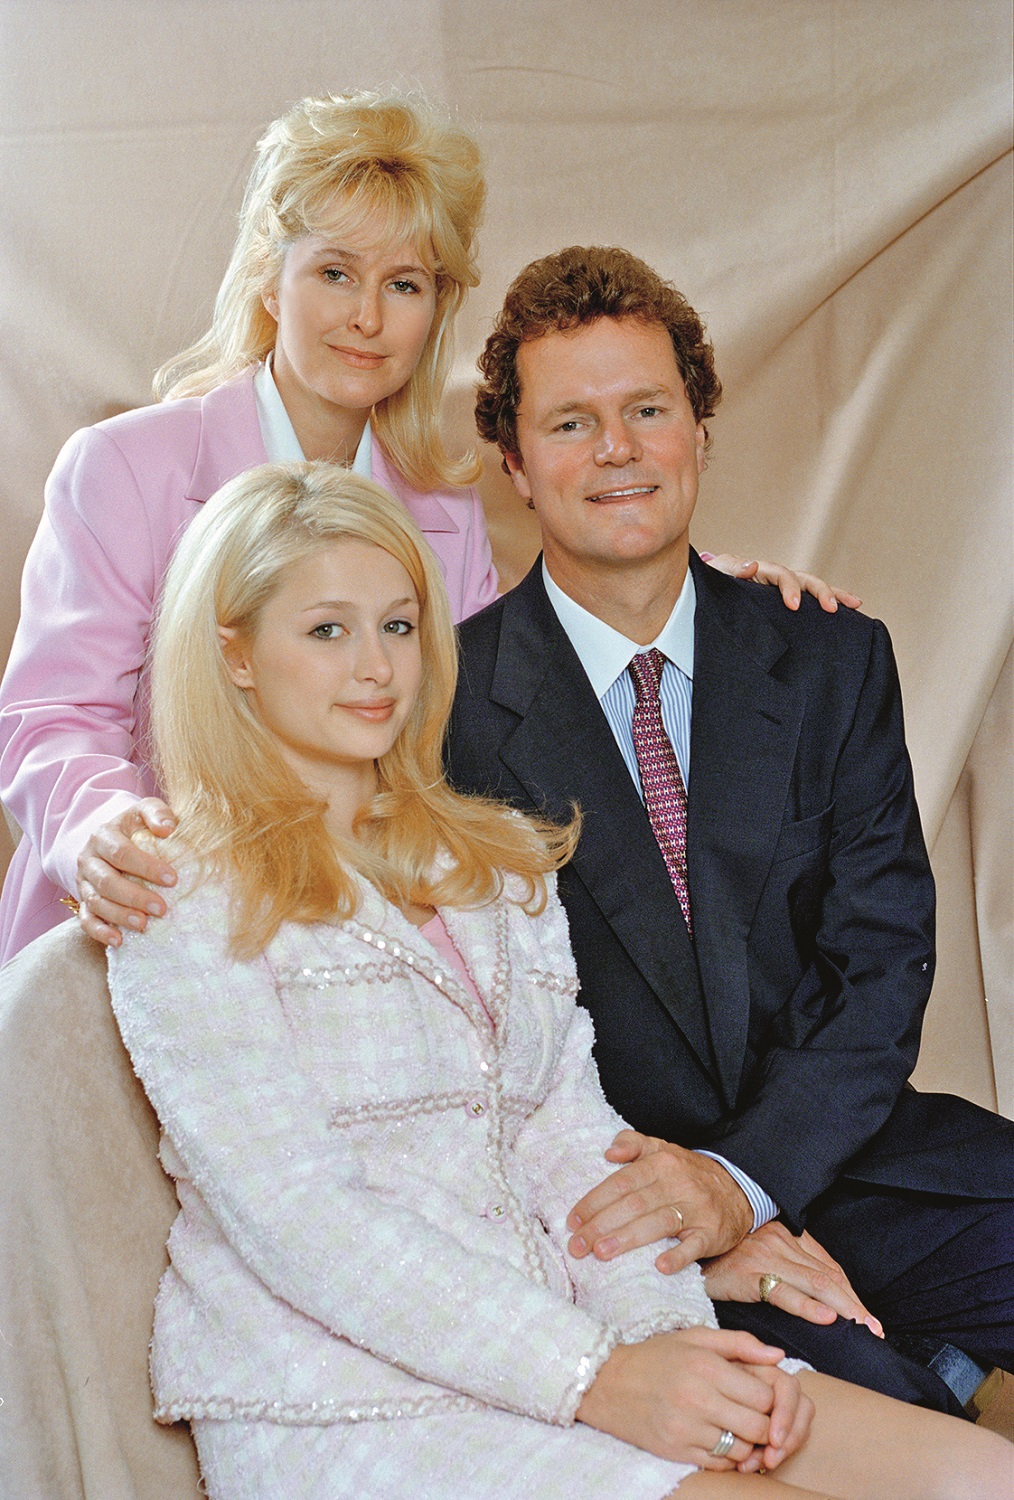 American socialite and television personality Paris Hilton with her parents, Kathy and Richard Hilton, 5th July 1996. (Photo by Colin Davey/Getty Images)